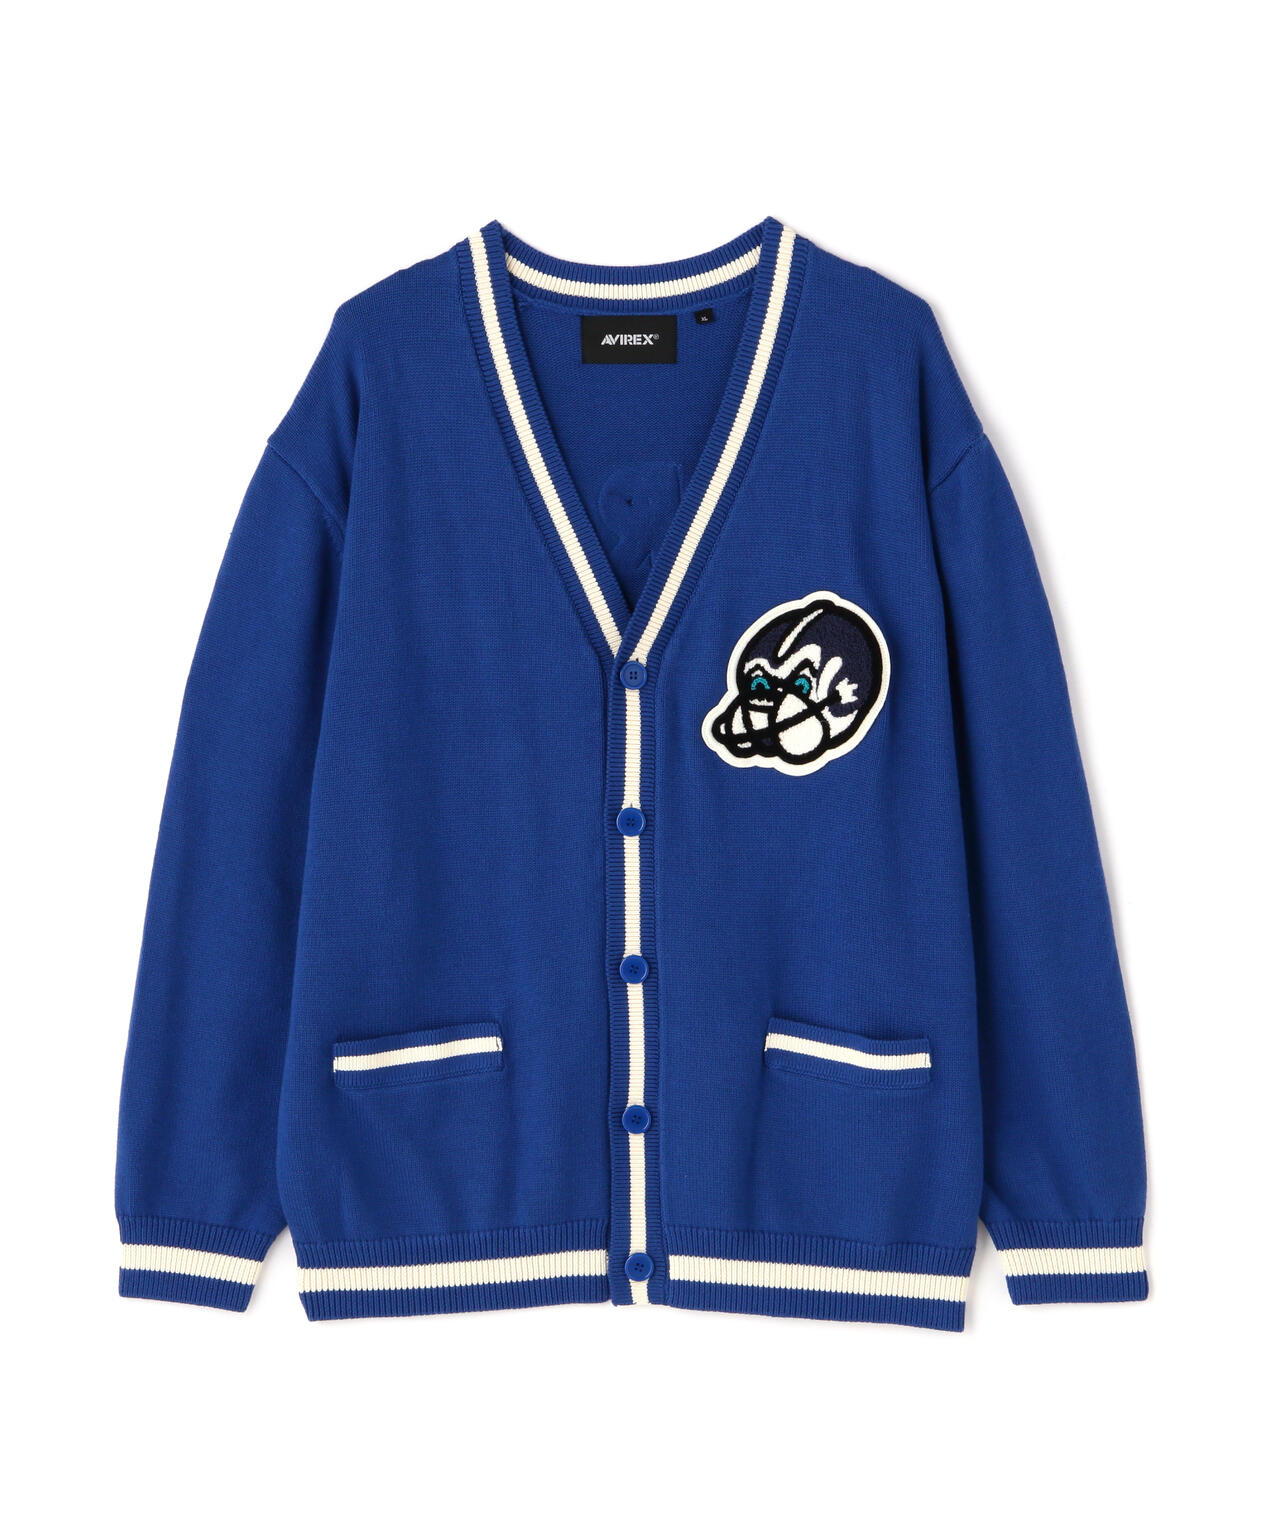 LETTERED CHENILLE PATCH KNIT CARDIGAN / レタード シェニール パッチ ニット カーディガン